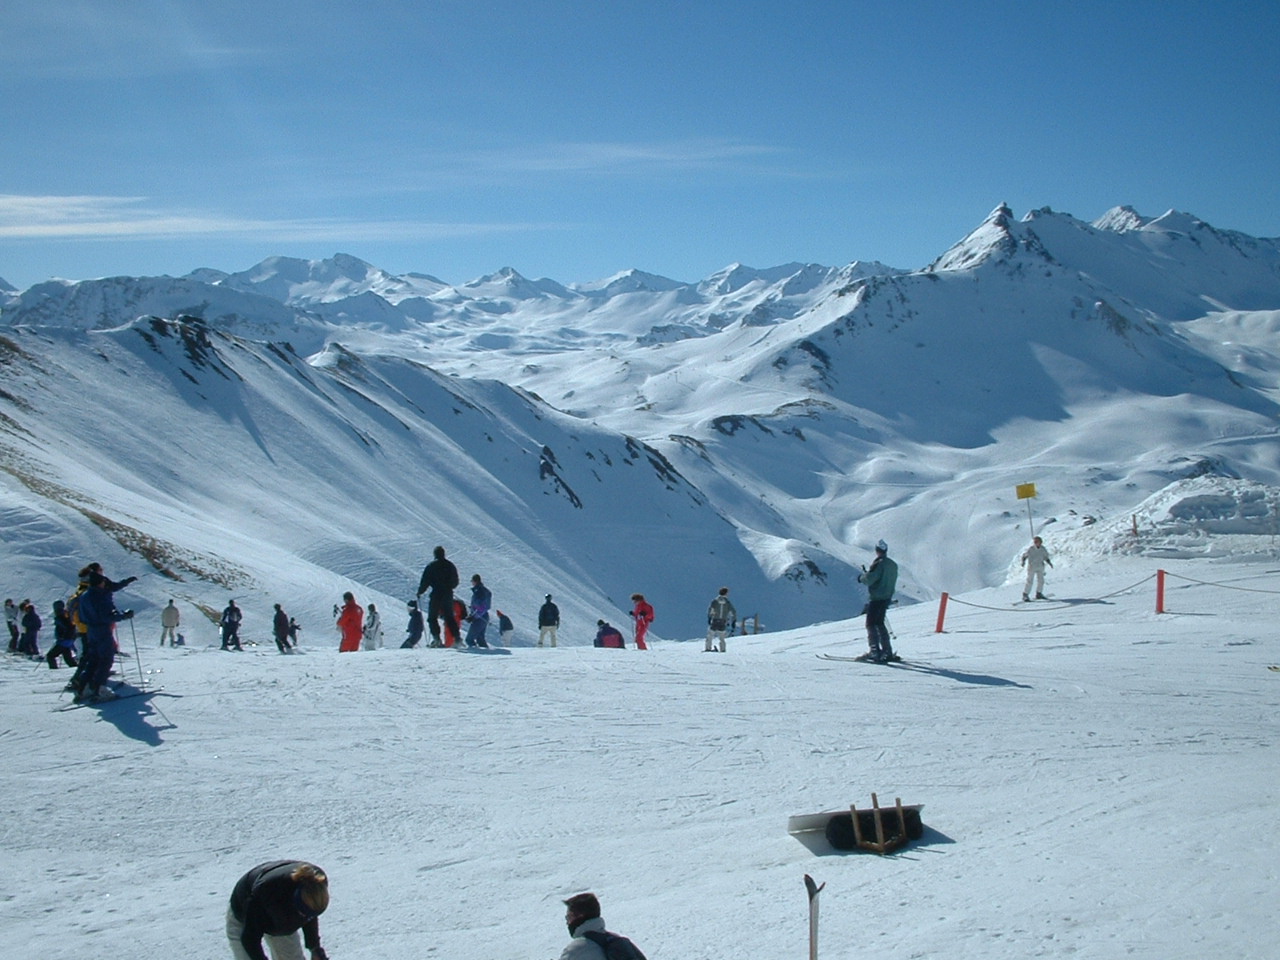 several people skiing on a ski slope with mountains in the background